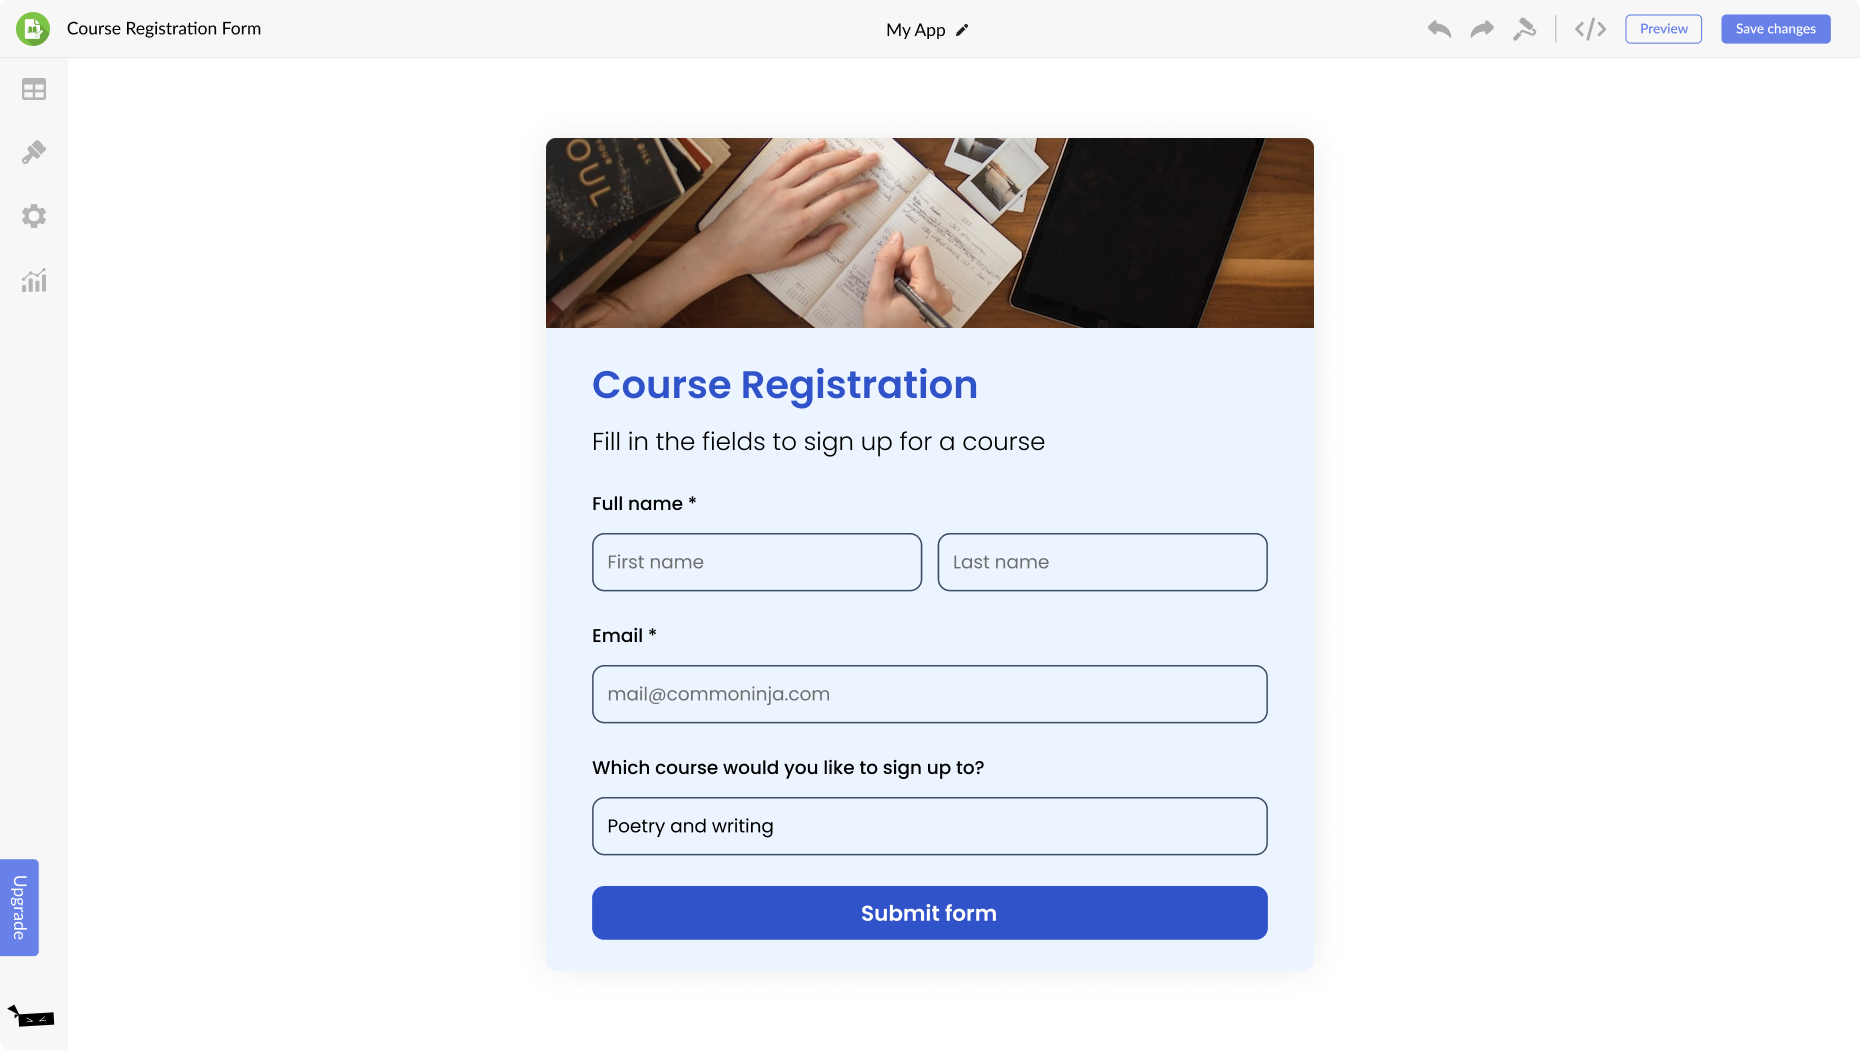 Course Registration Form for Payhip